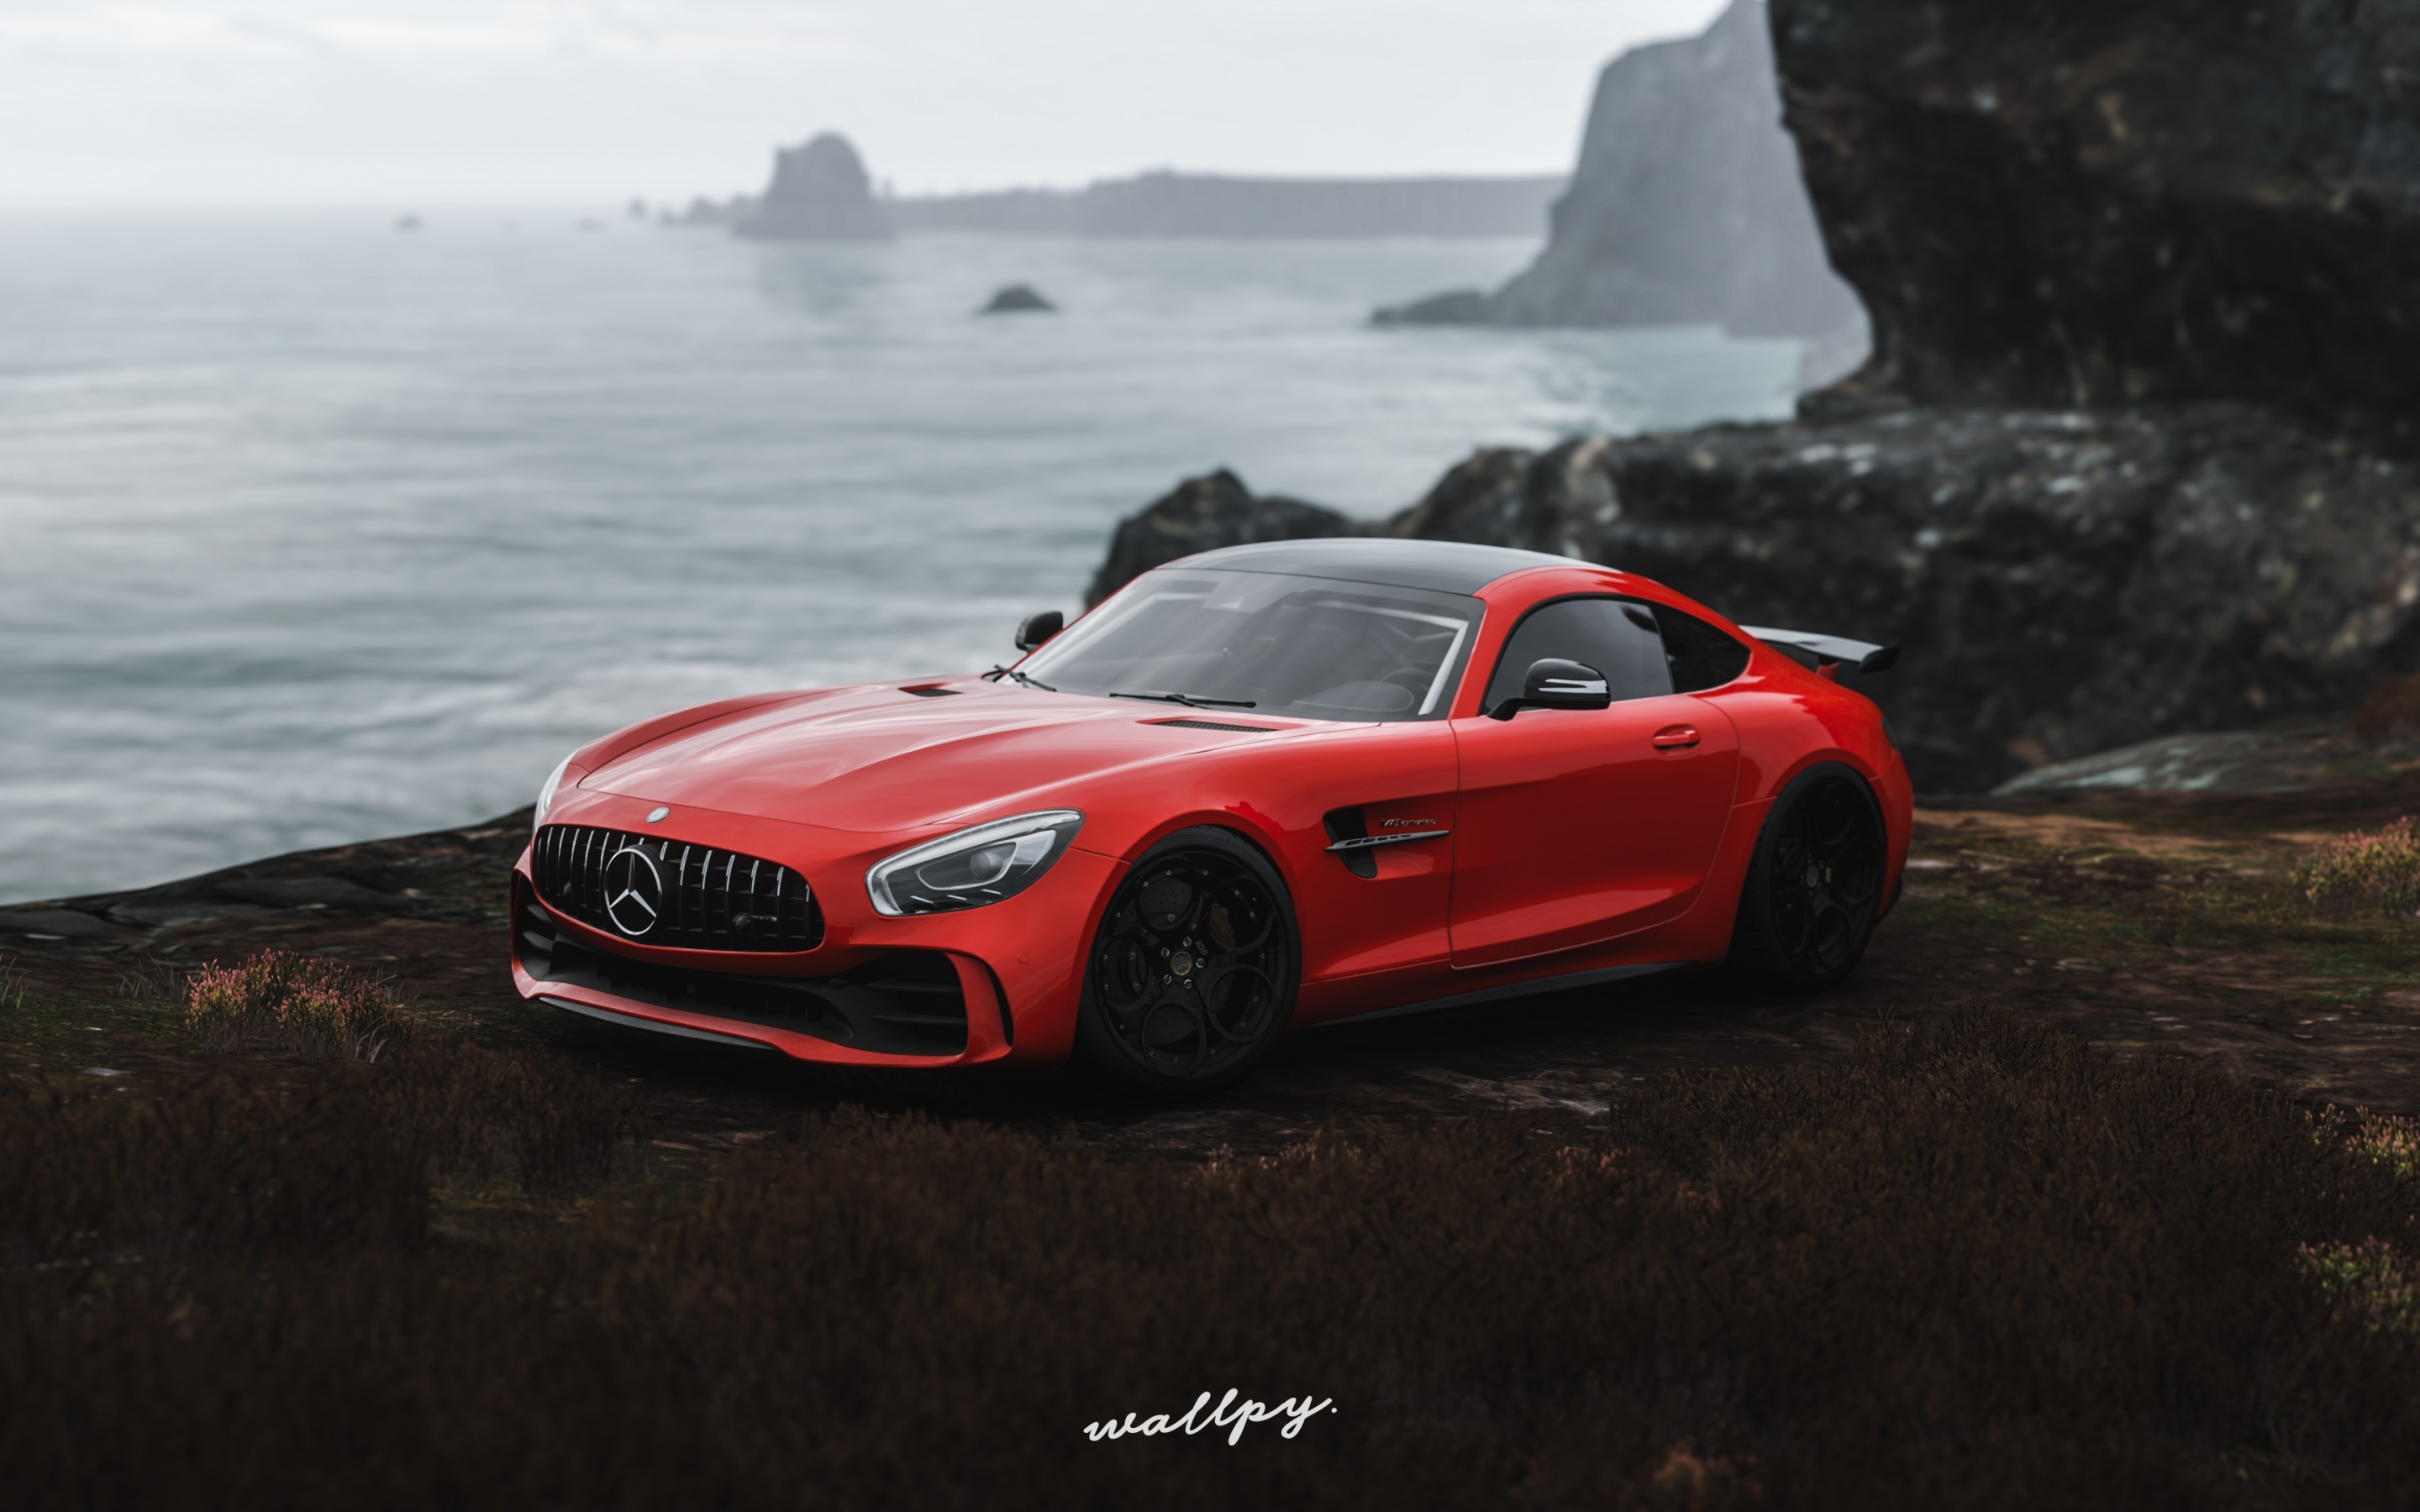 Mercedes-AMG GT R, off-road, Forza Horizon 4, video game, 2880x1800 wallpaper